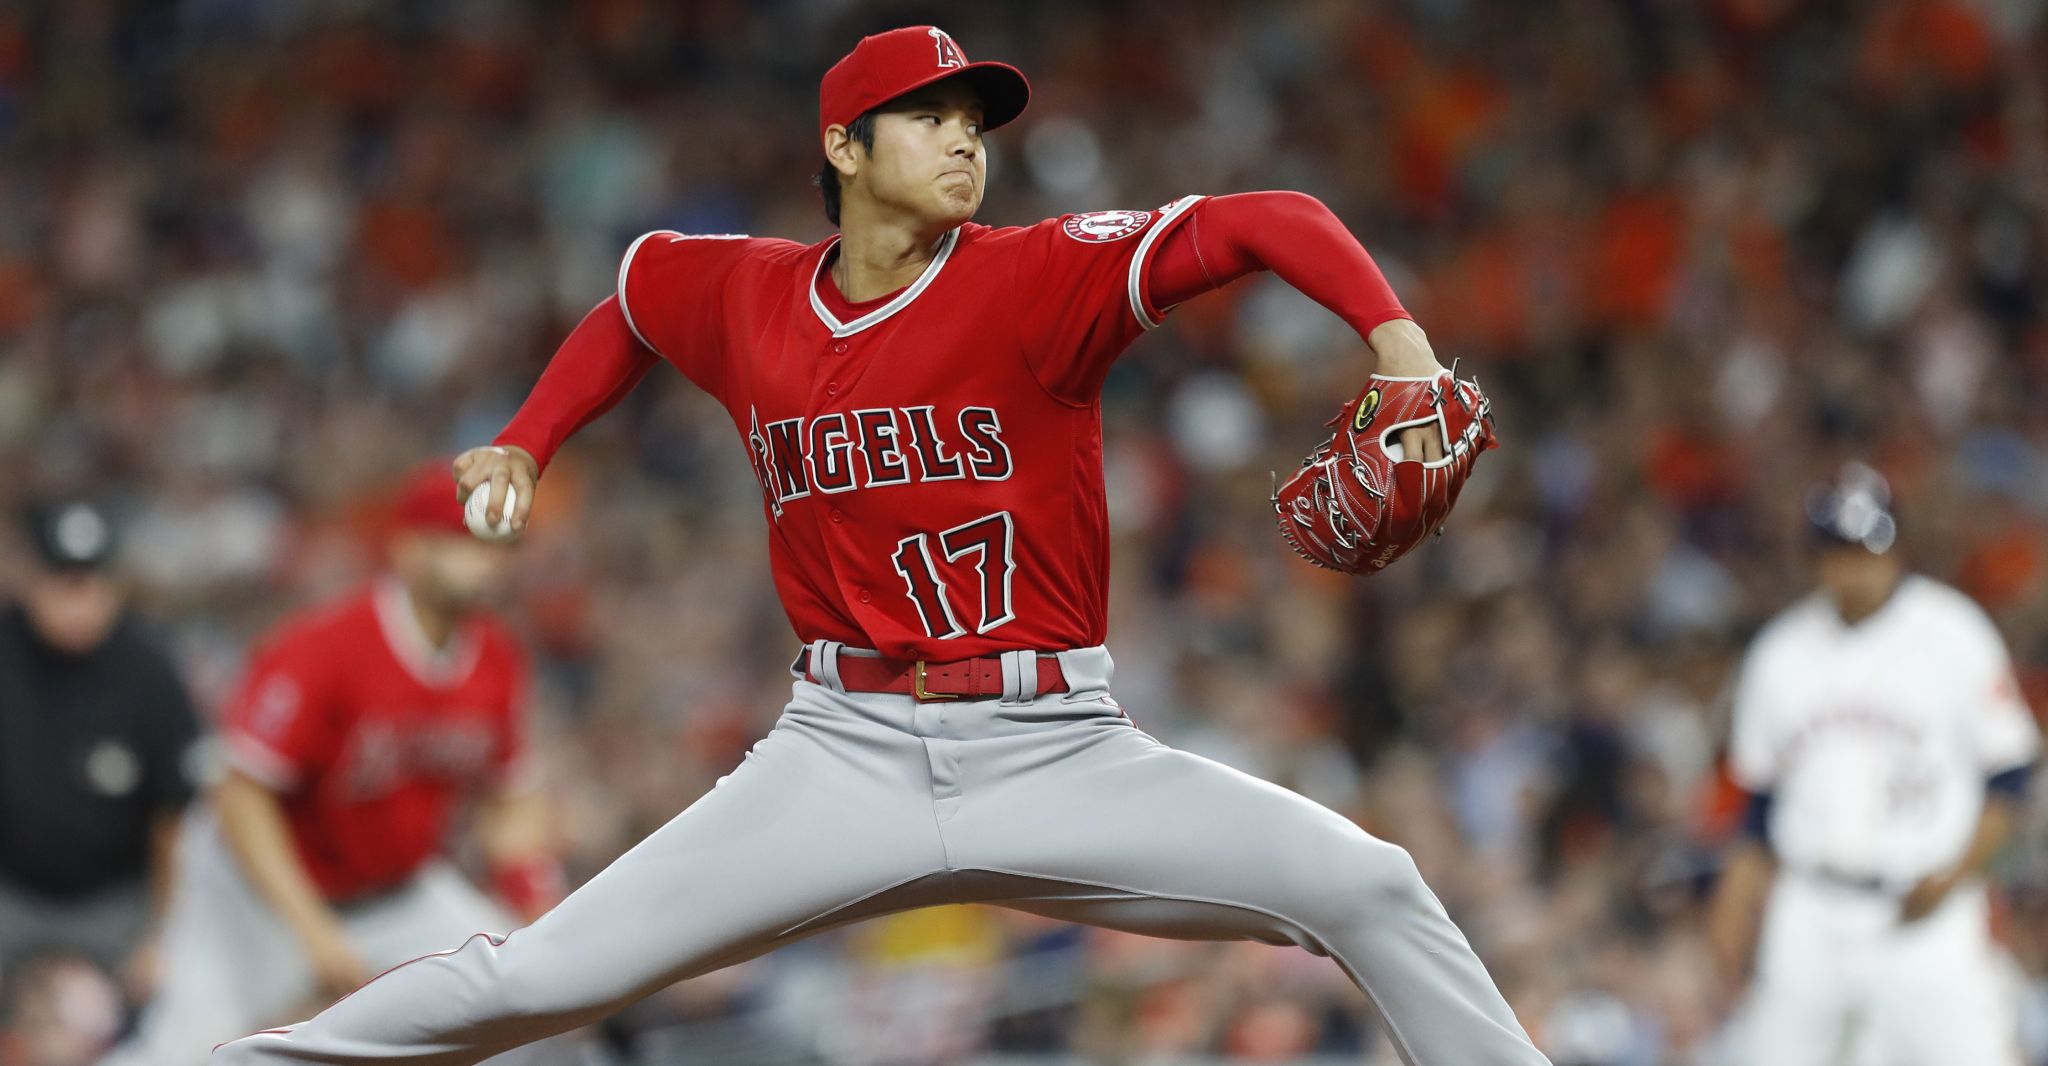 Angels Shohei Ohtani To Return To Mound Against Astros